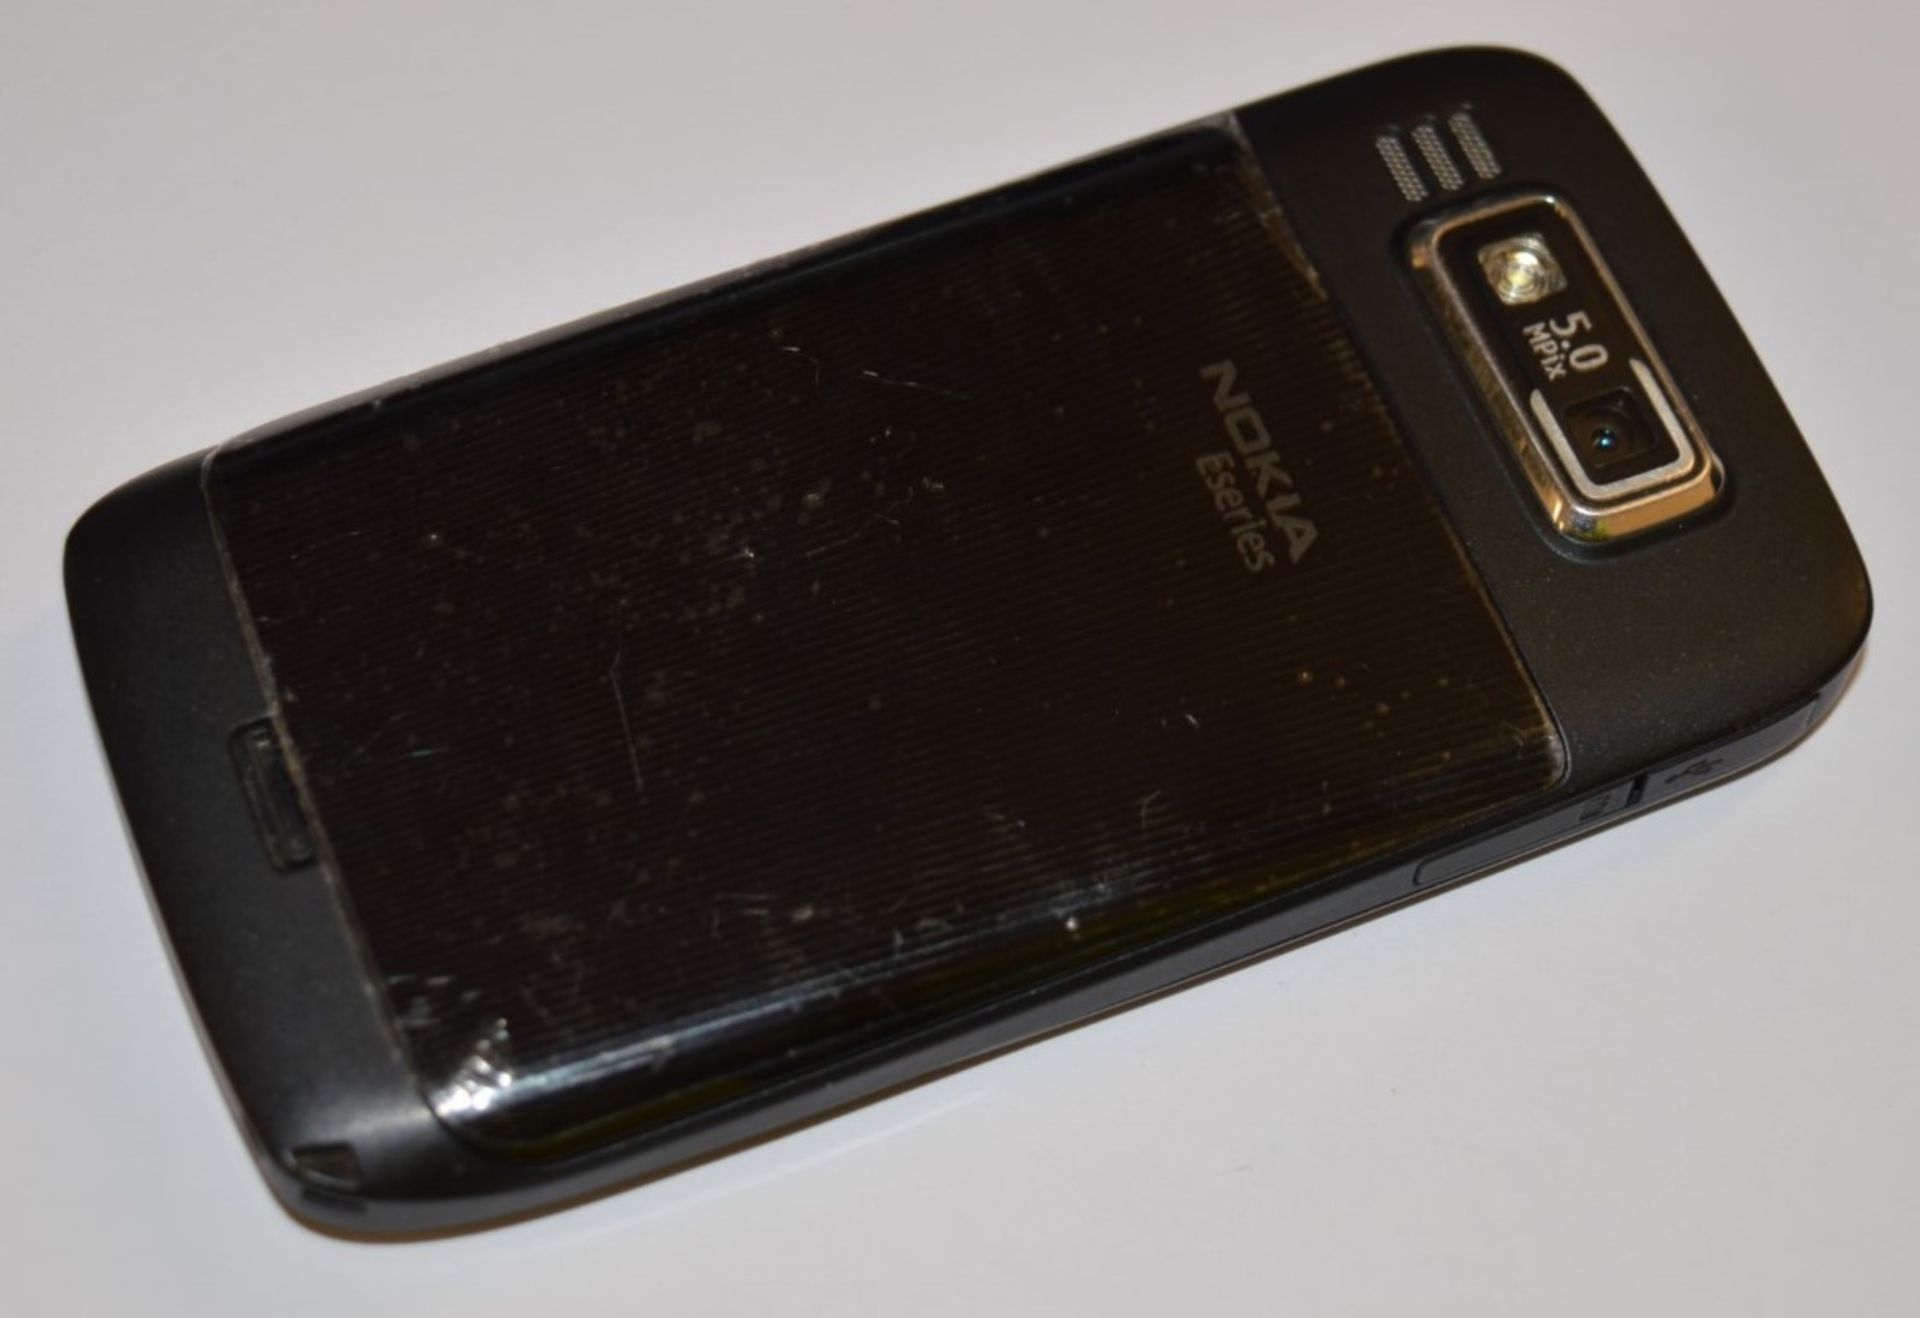 1 x Nokia E72 Mobile Phone Handset With Charger - Features Qwerty Keyboard, 600mhz CPU, 250mb - Image 5 of 6